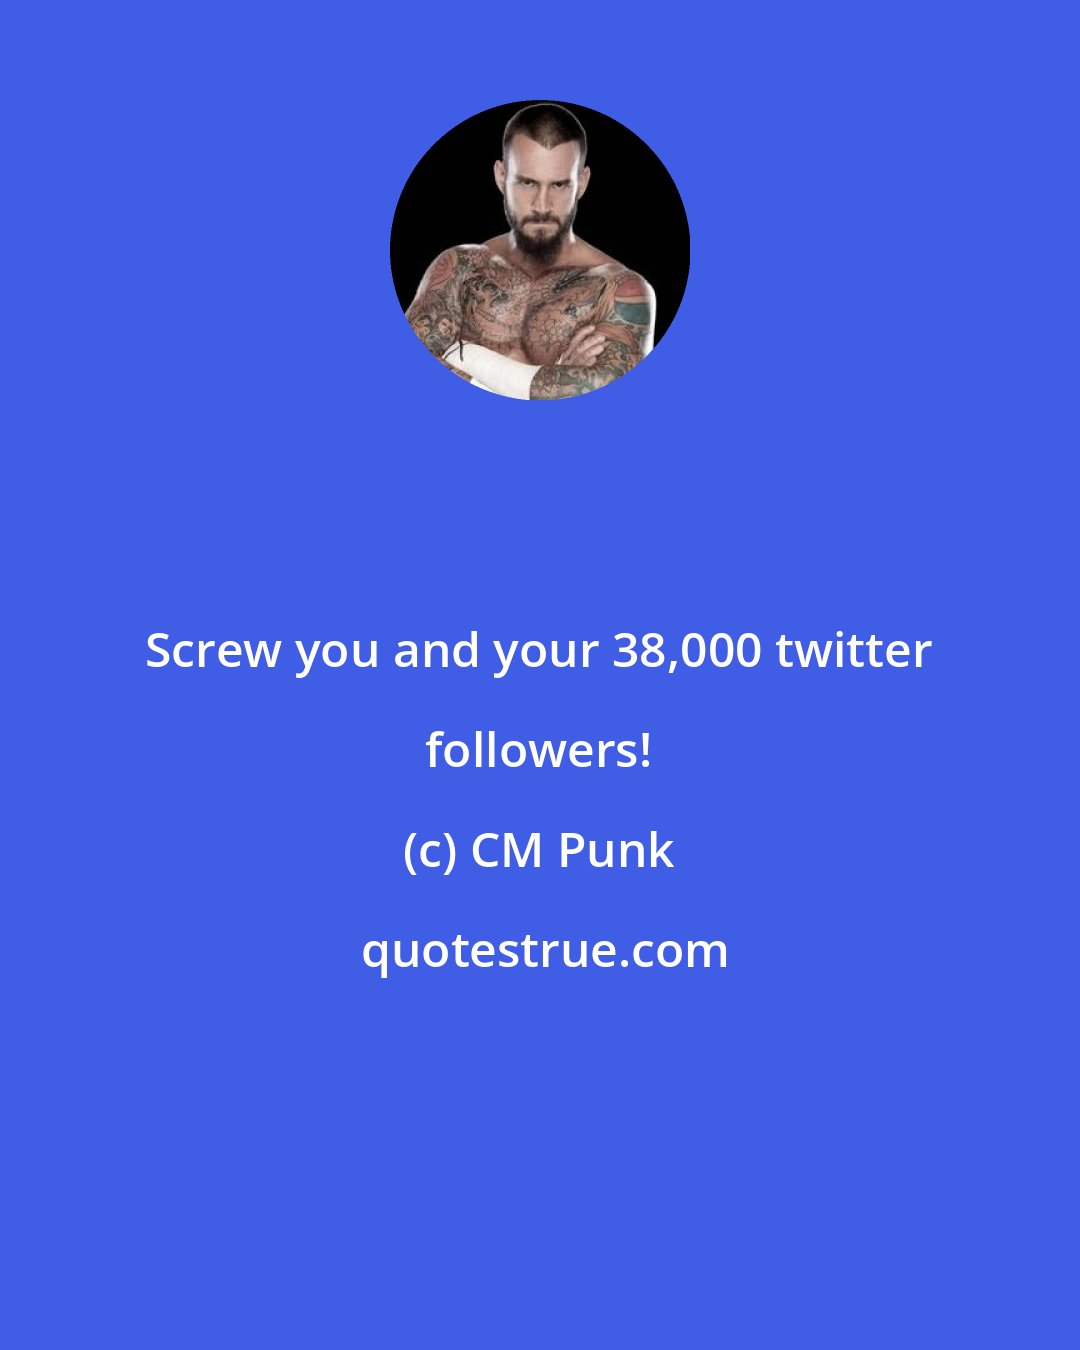 CM Punk: Screw you and your 38,000 twitter followers!